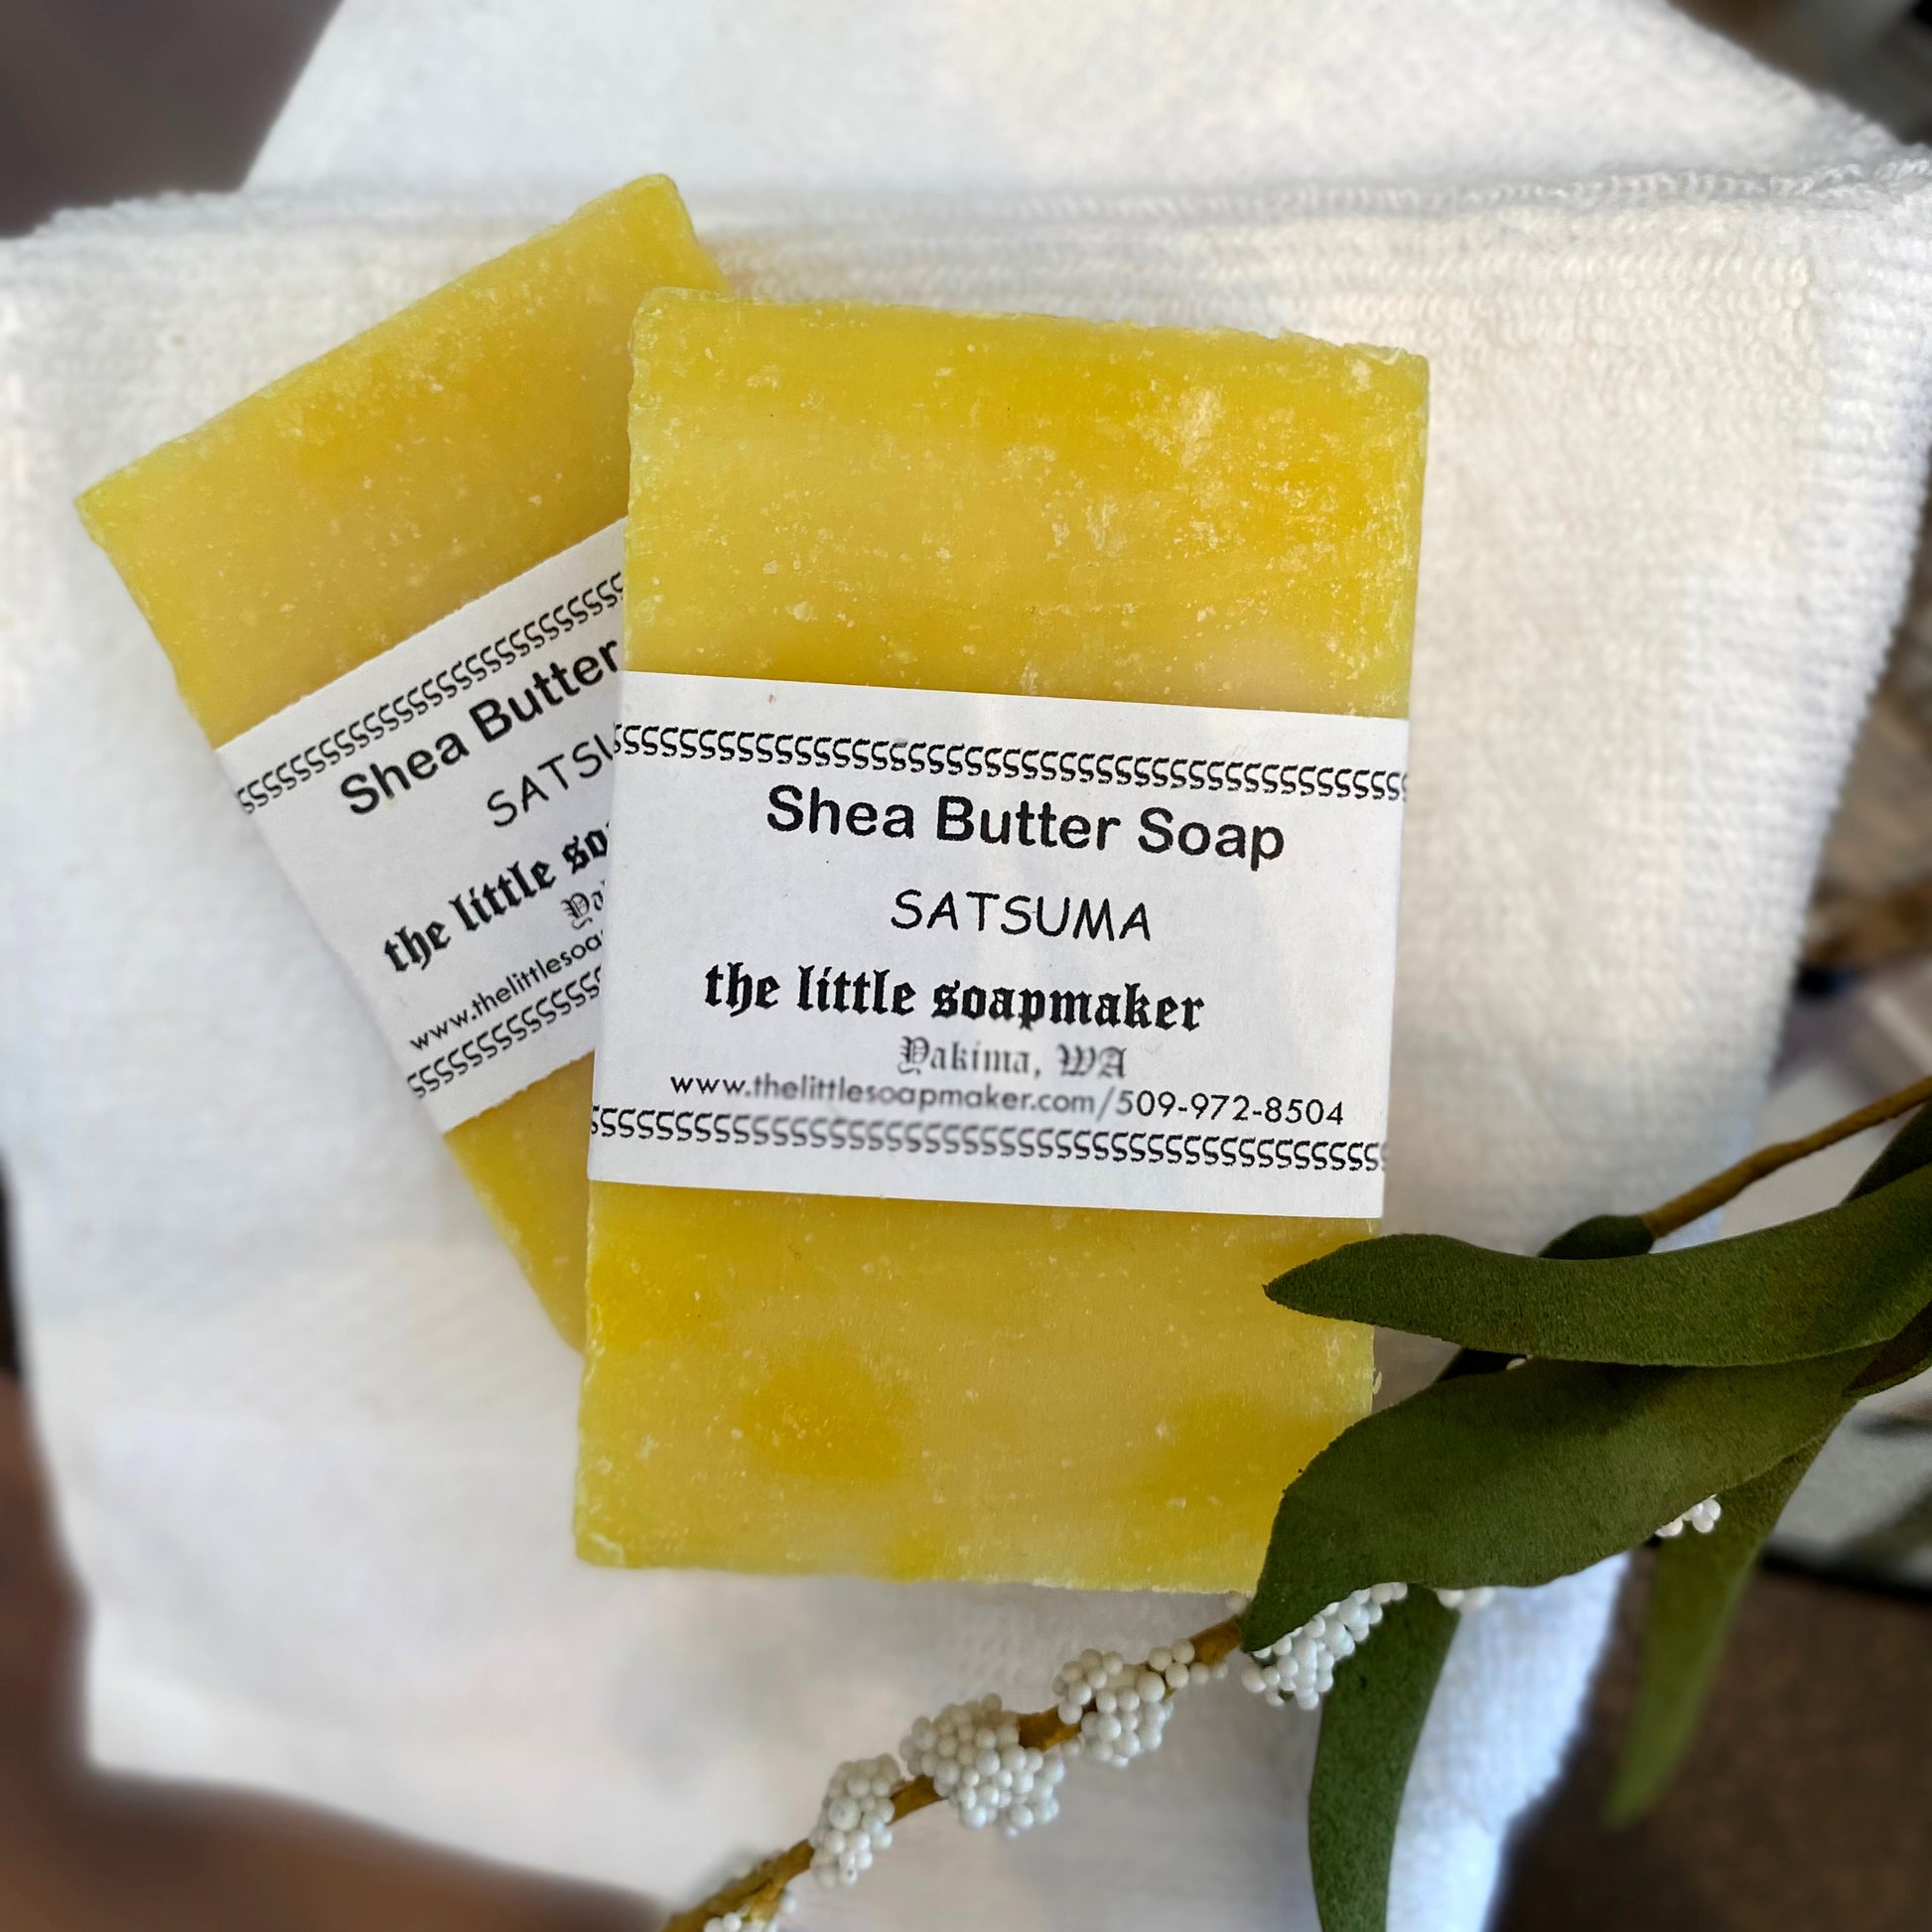 Purchase All-Natural Bliss with Coconut and Shea Butter Soap